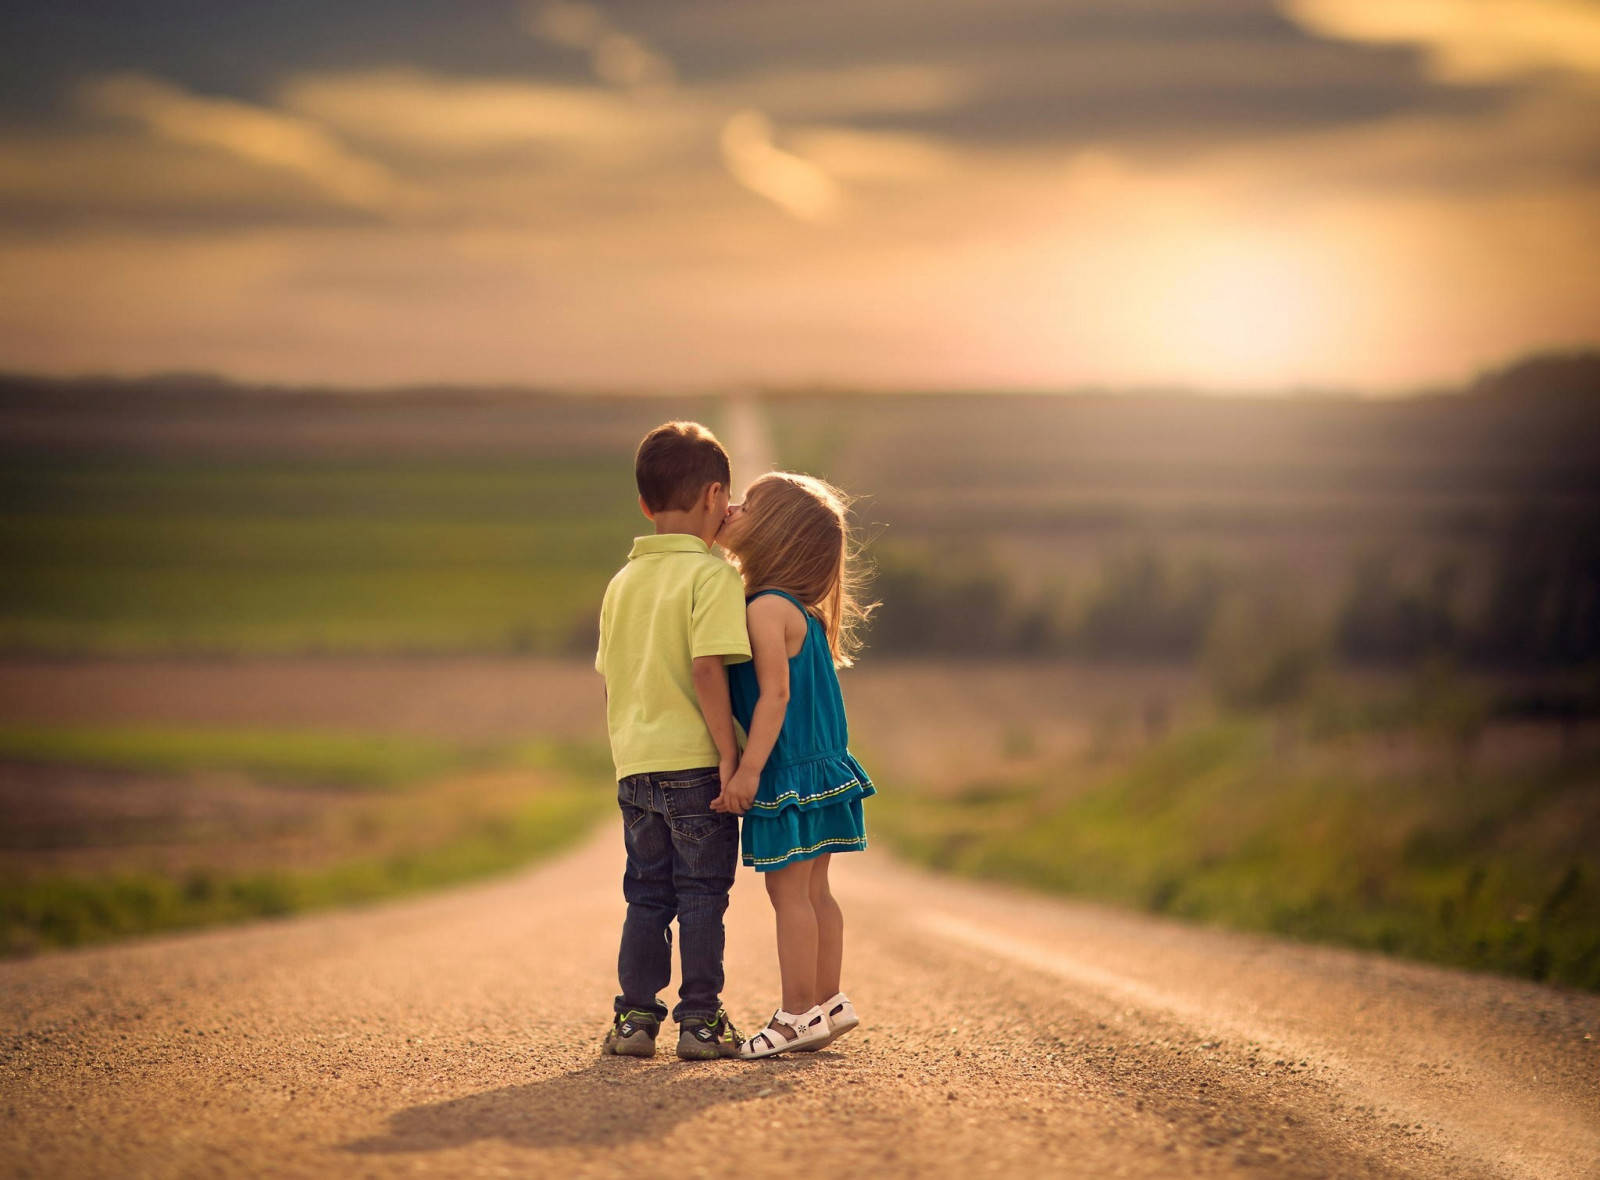 Kids Holding Hands With A Kiss Wallpaper